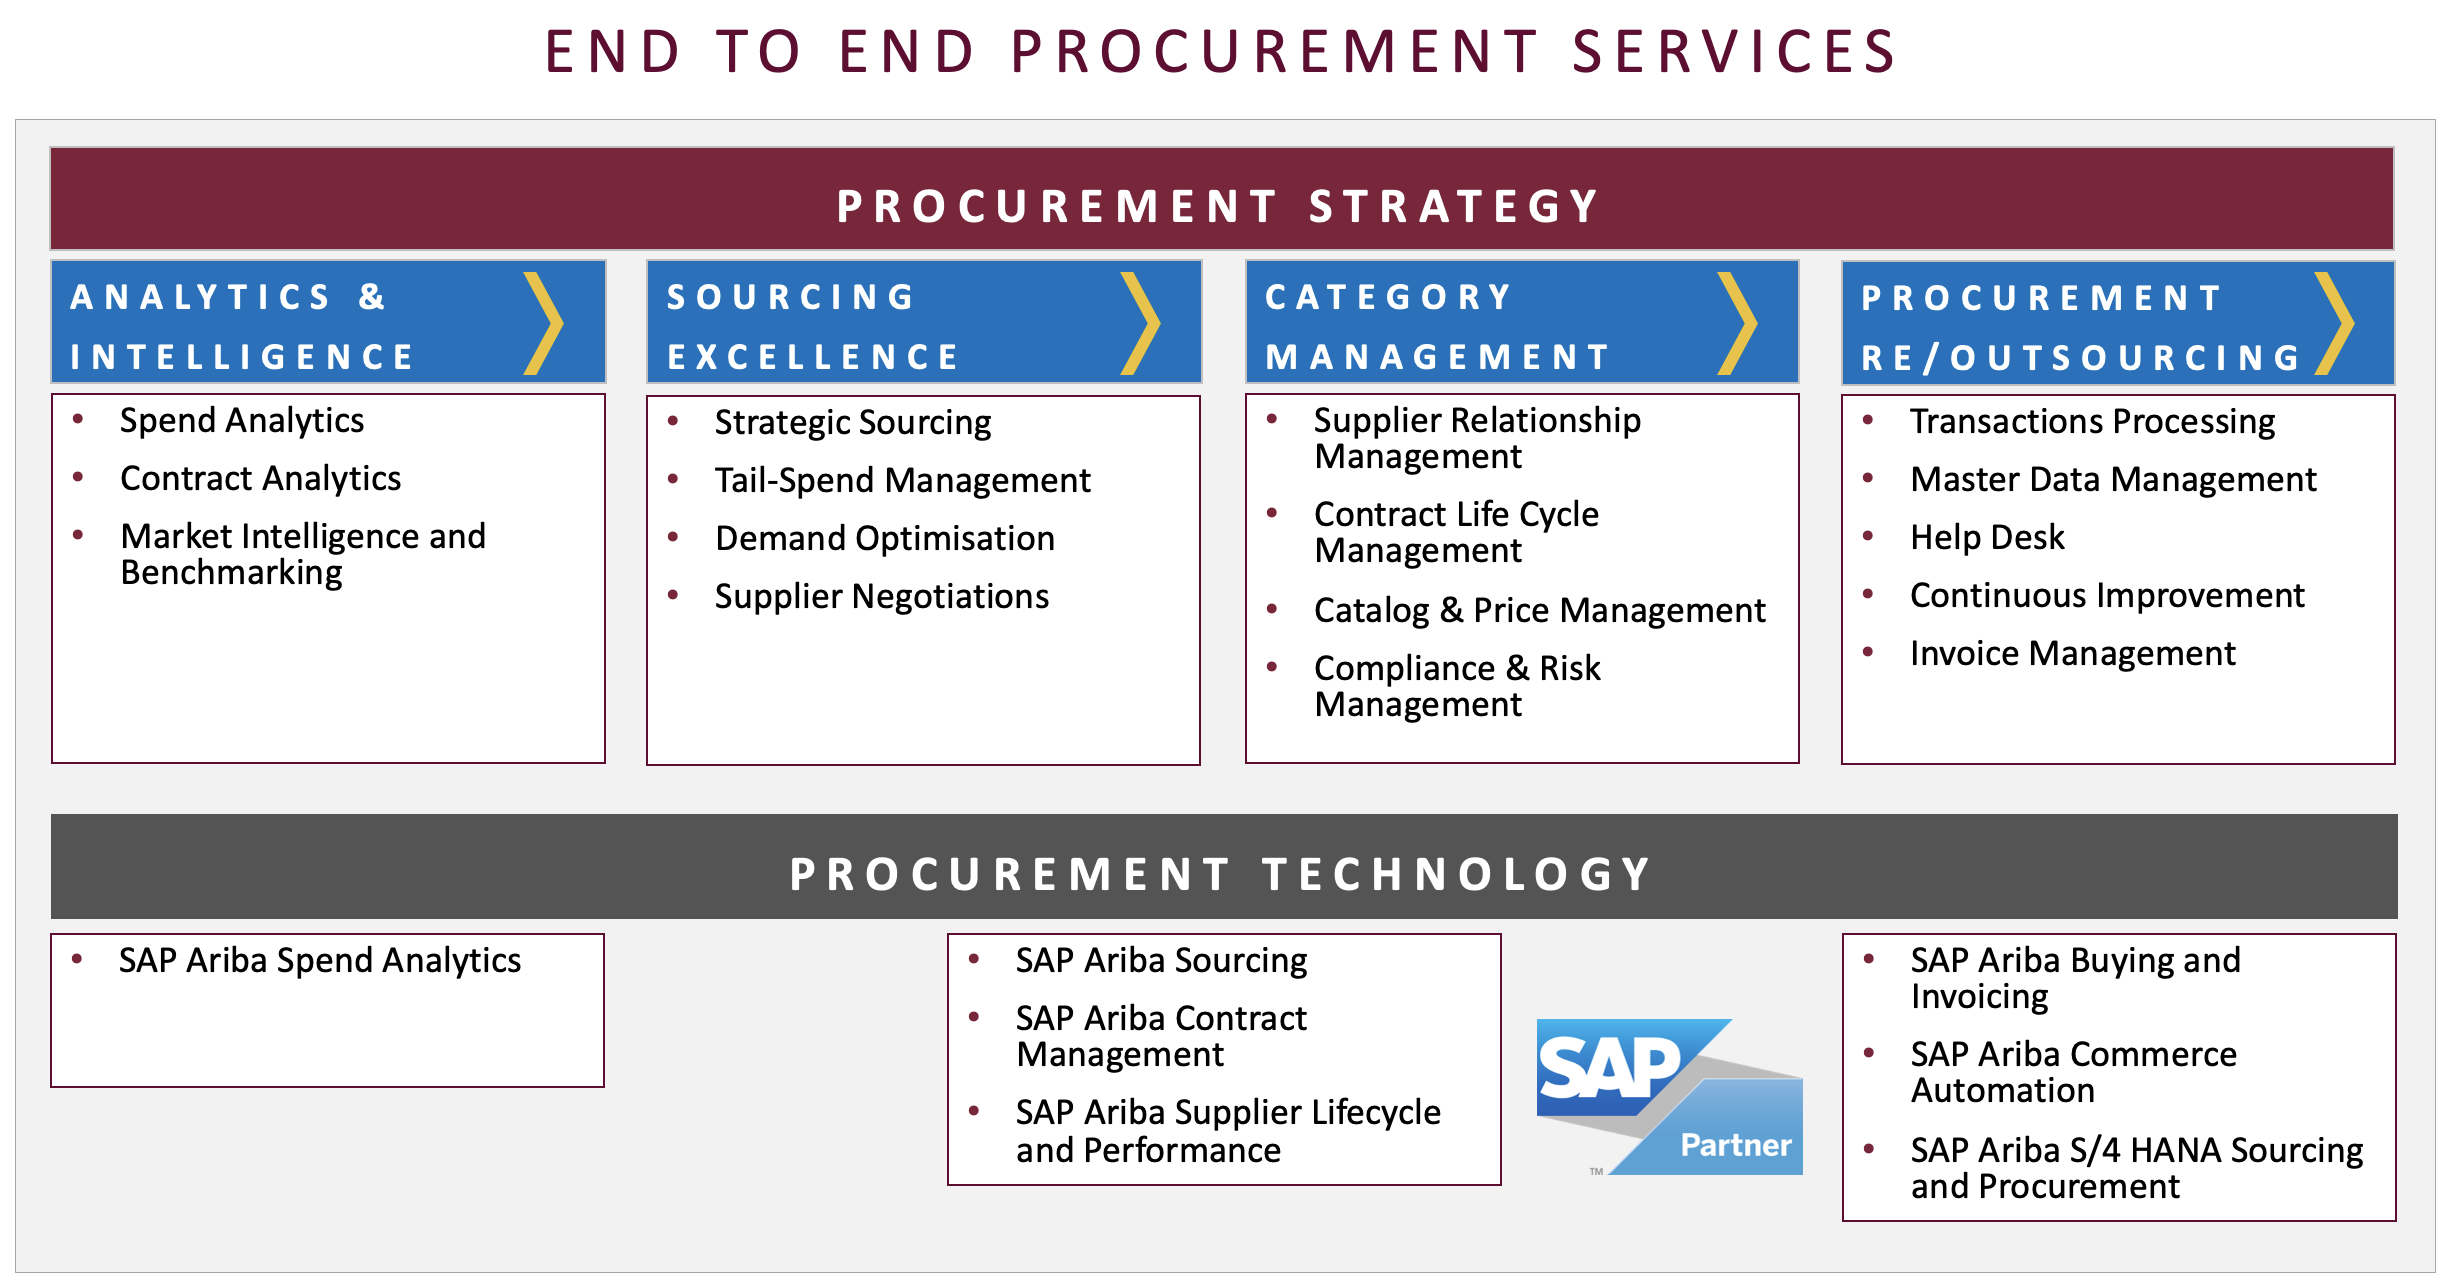 END TO END PROCUREMENT STRATEGY